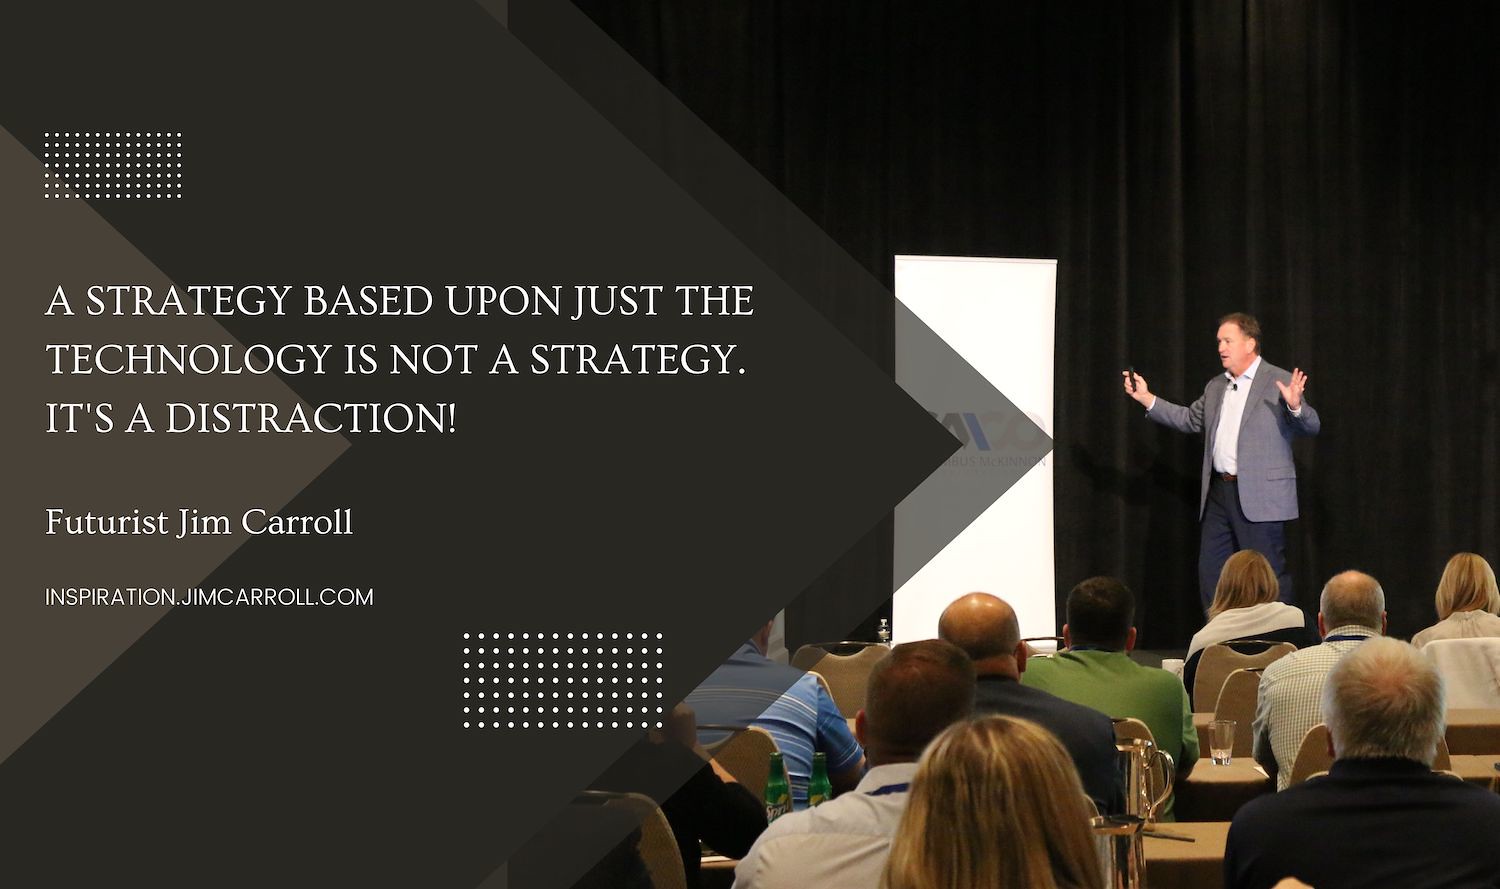 "A strategy based upon just the technology is not a strategy. It's a distraction!" - Futurist Jim Carroll